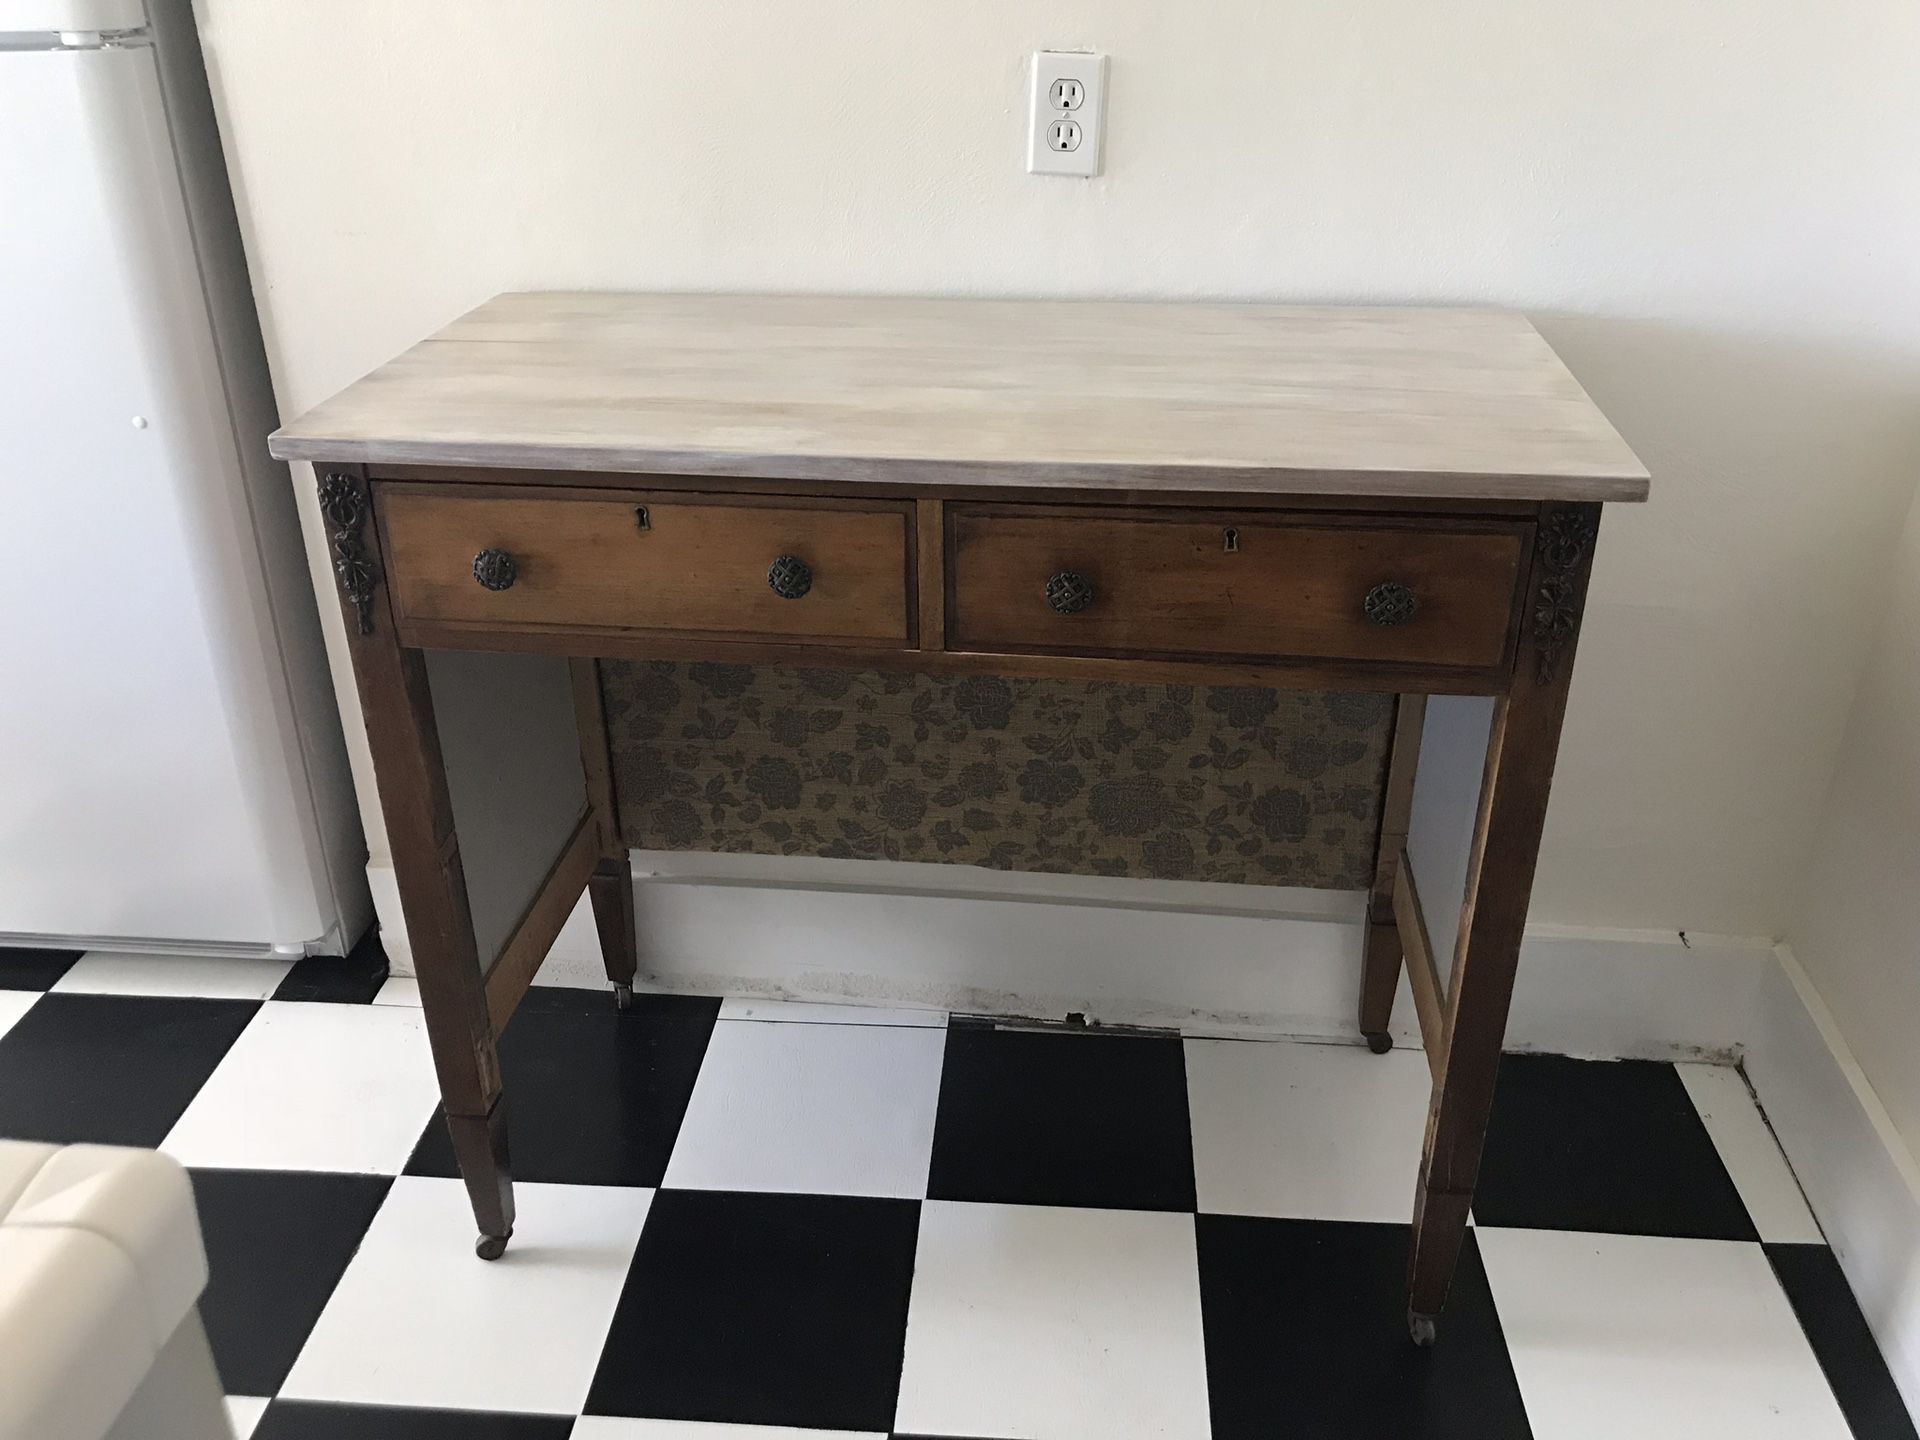 Vintage Rolling Table